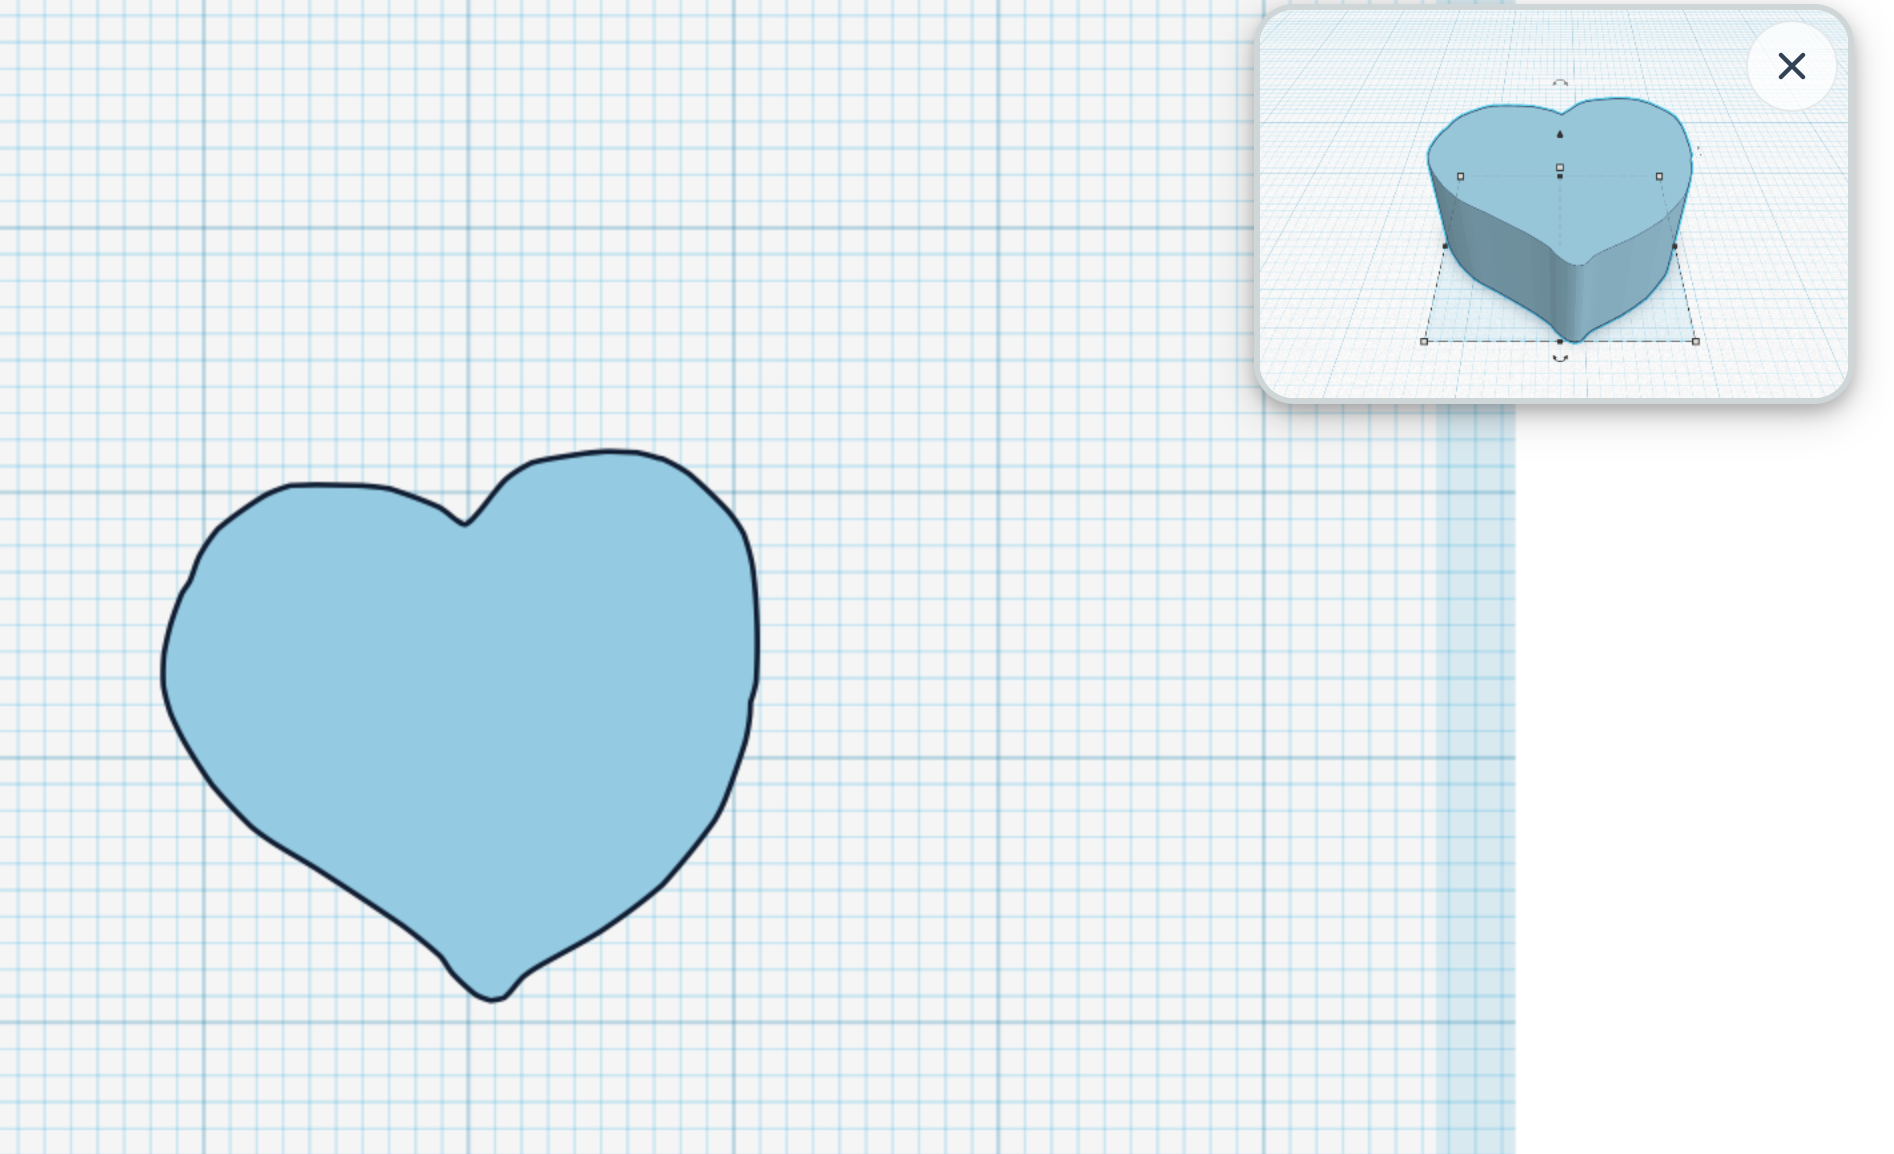 Digital Design Made Easy: Starting with Tinkercad’s Scribble Tool